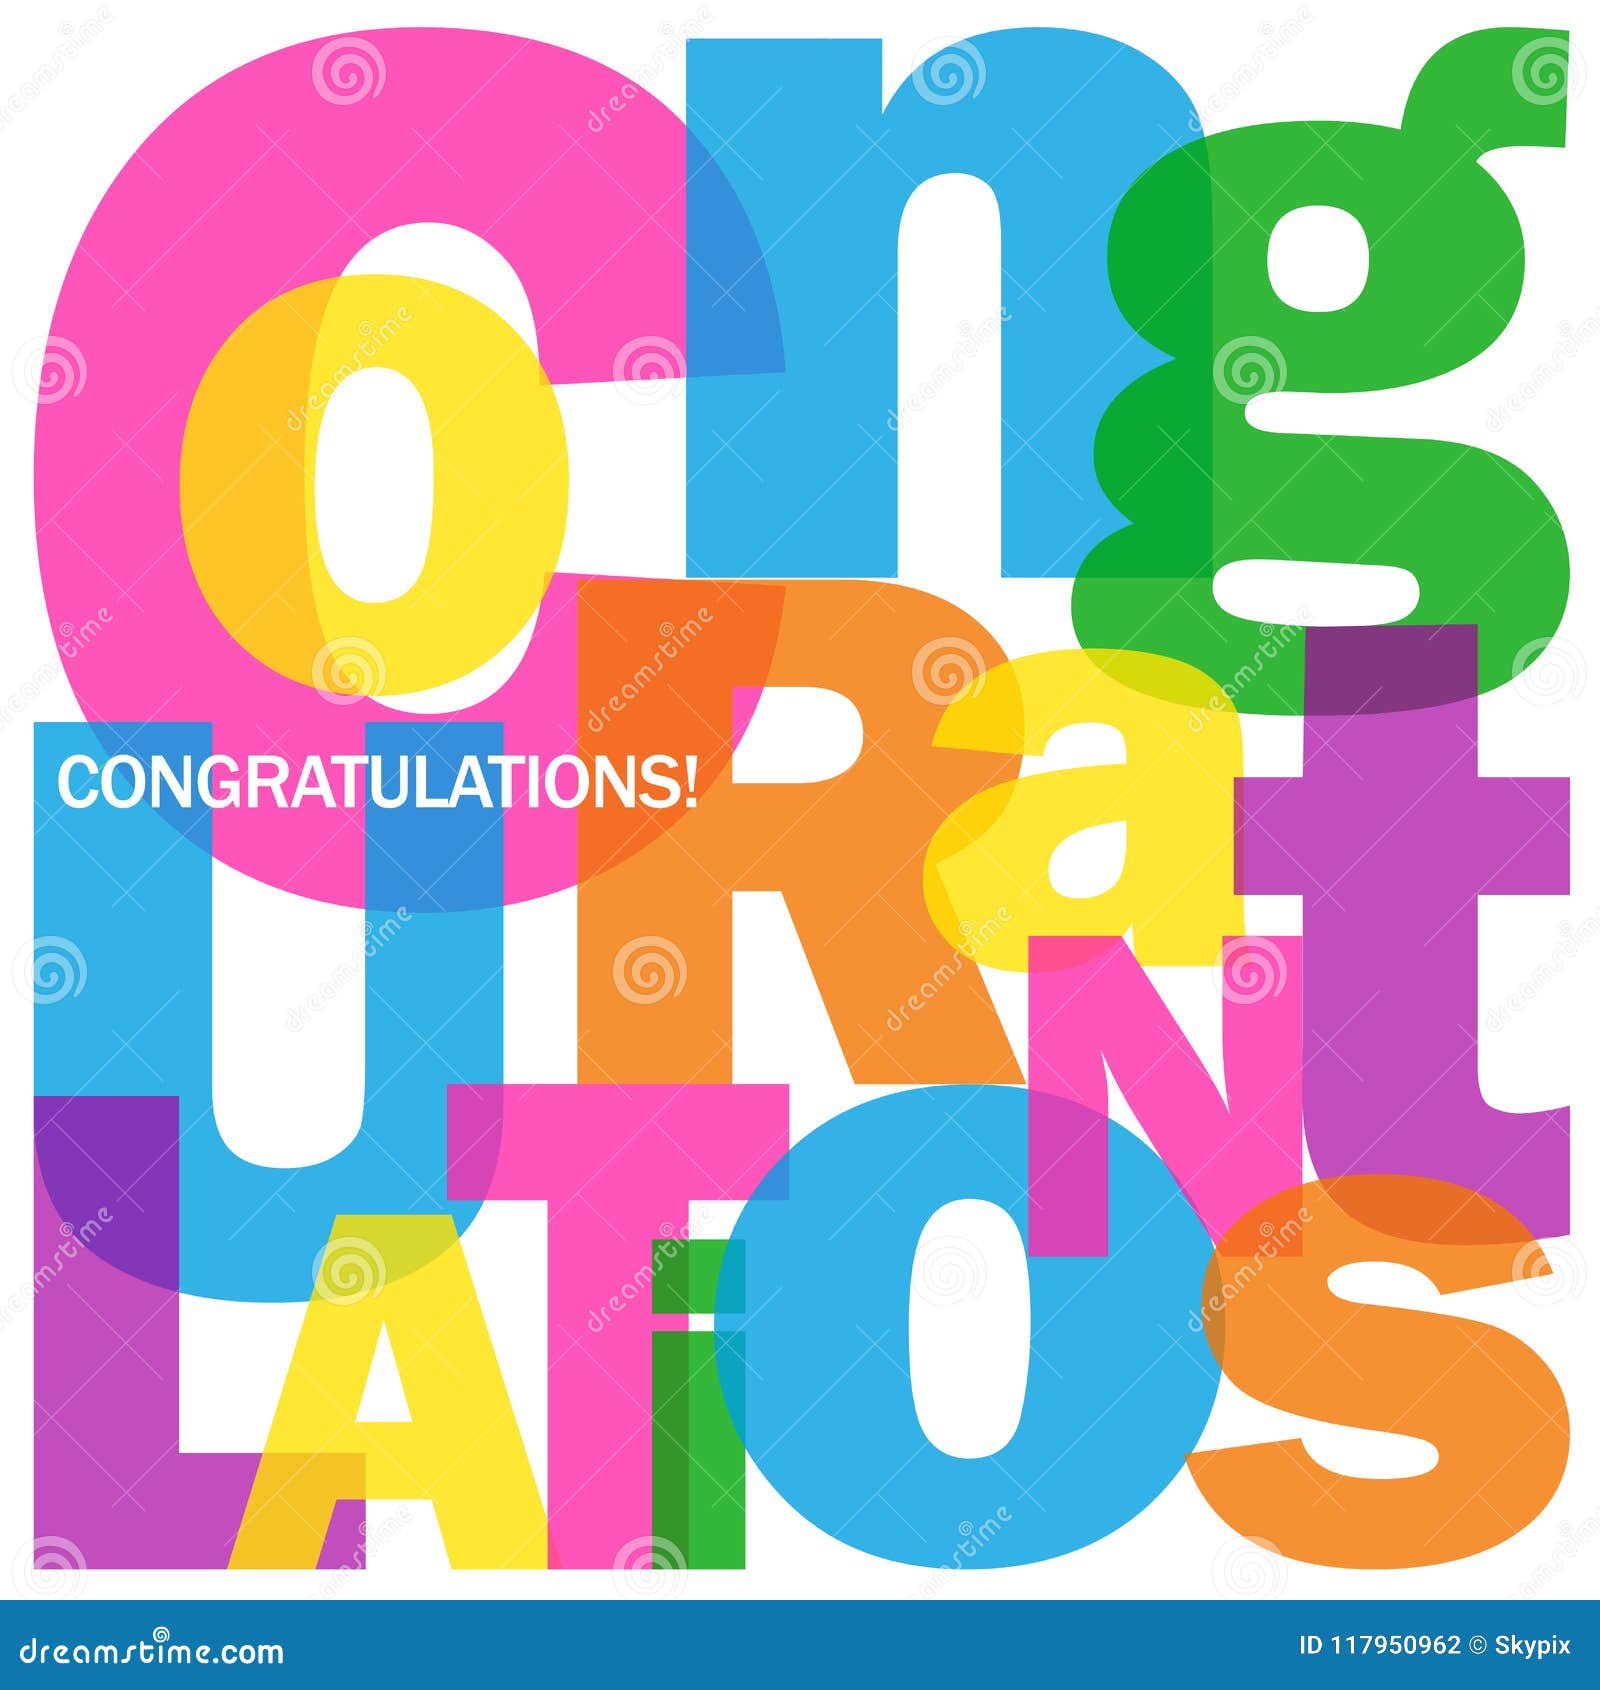 congratulations! letters collage